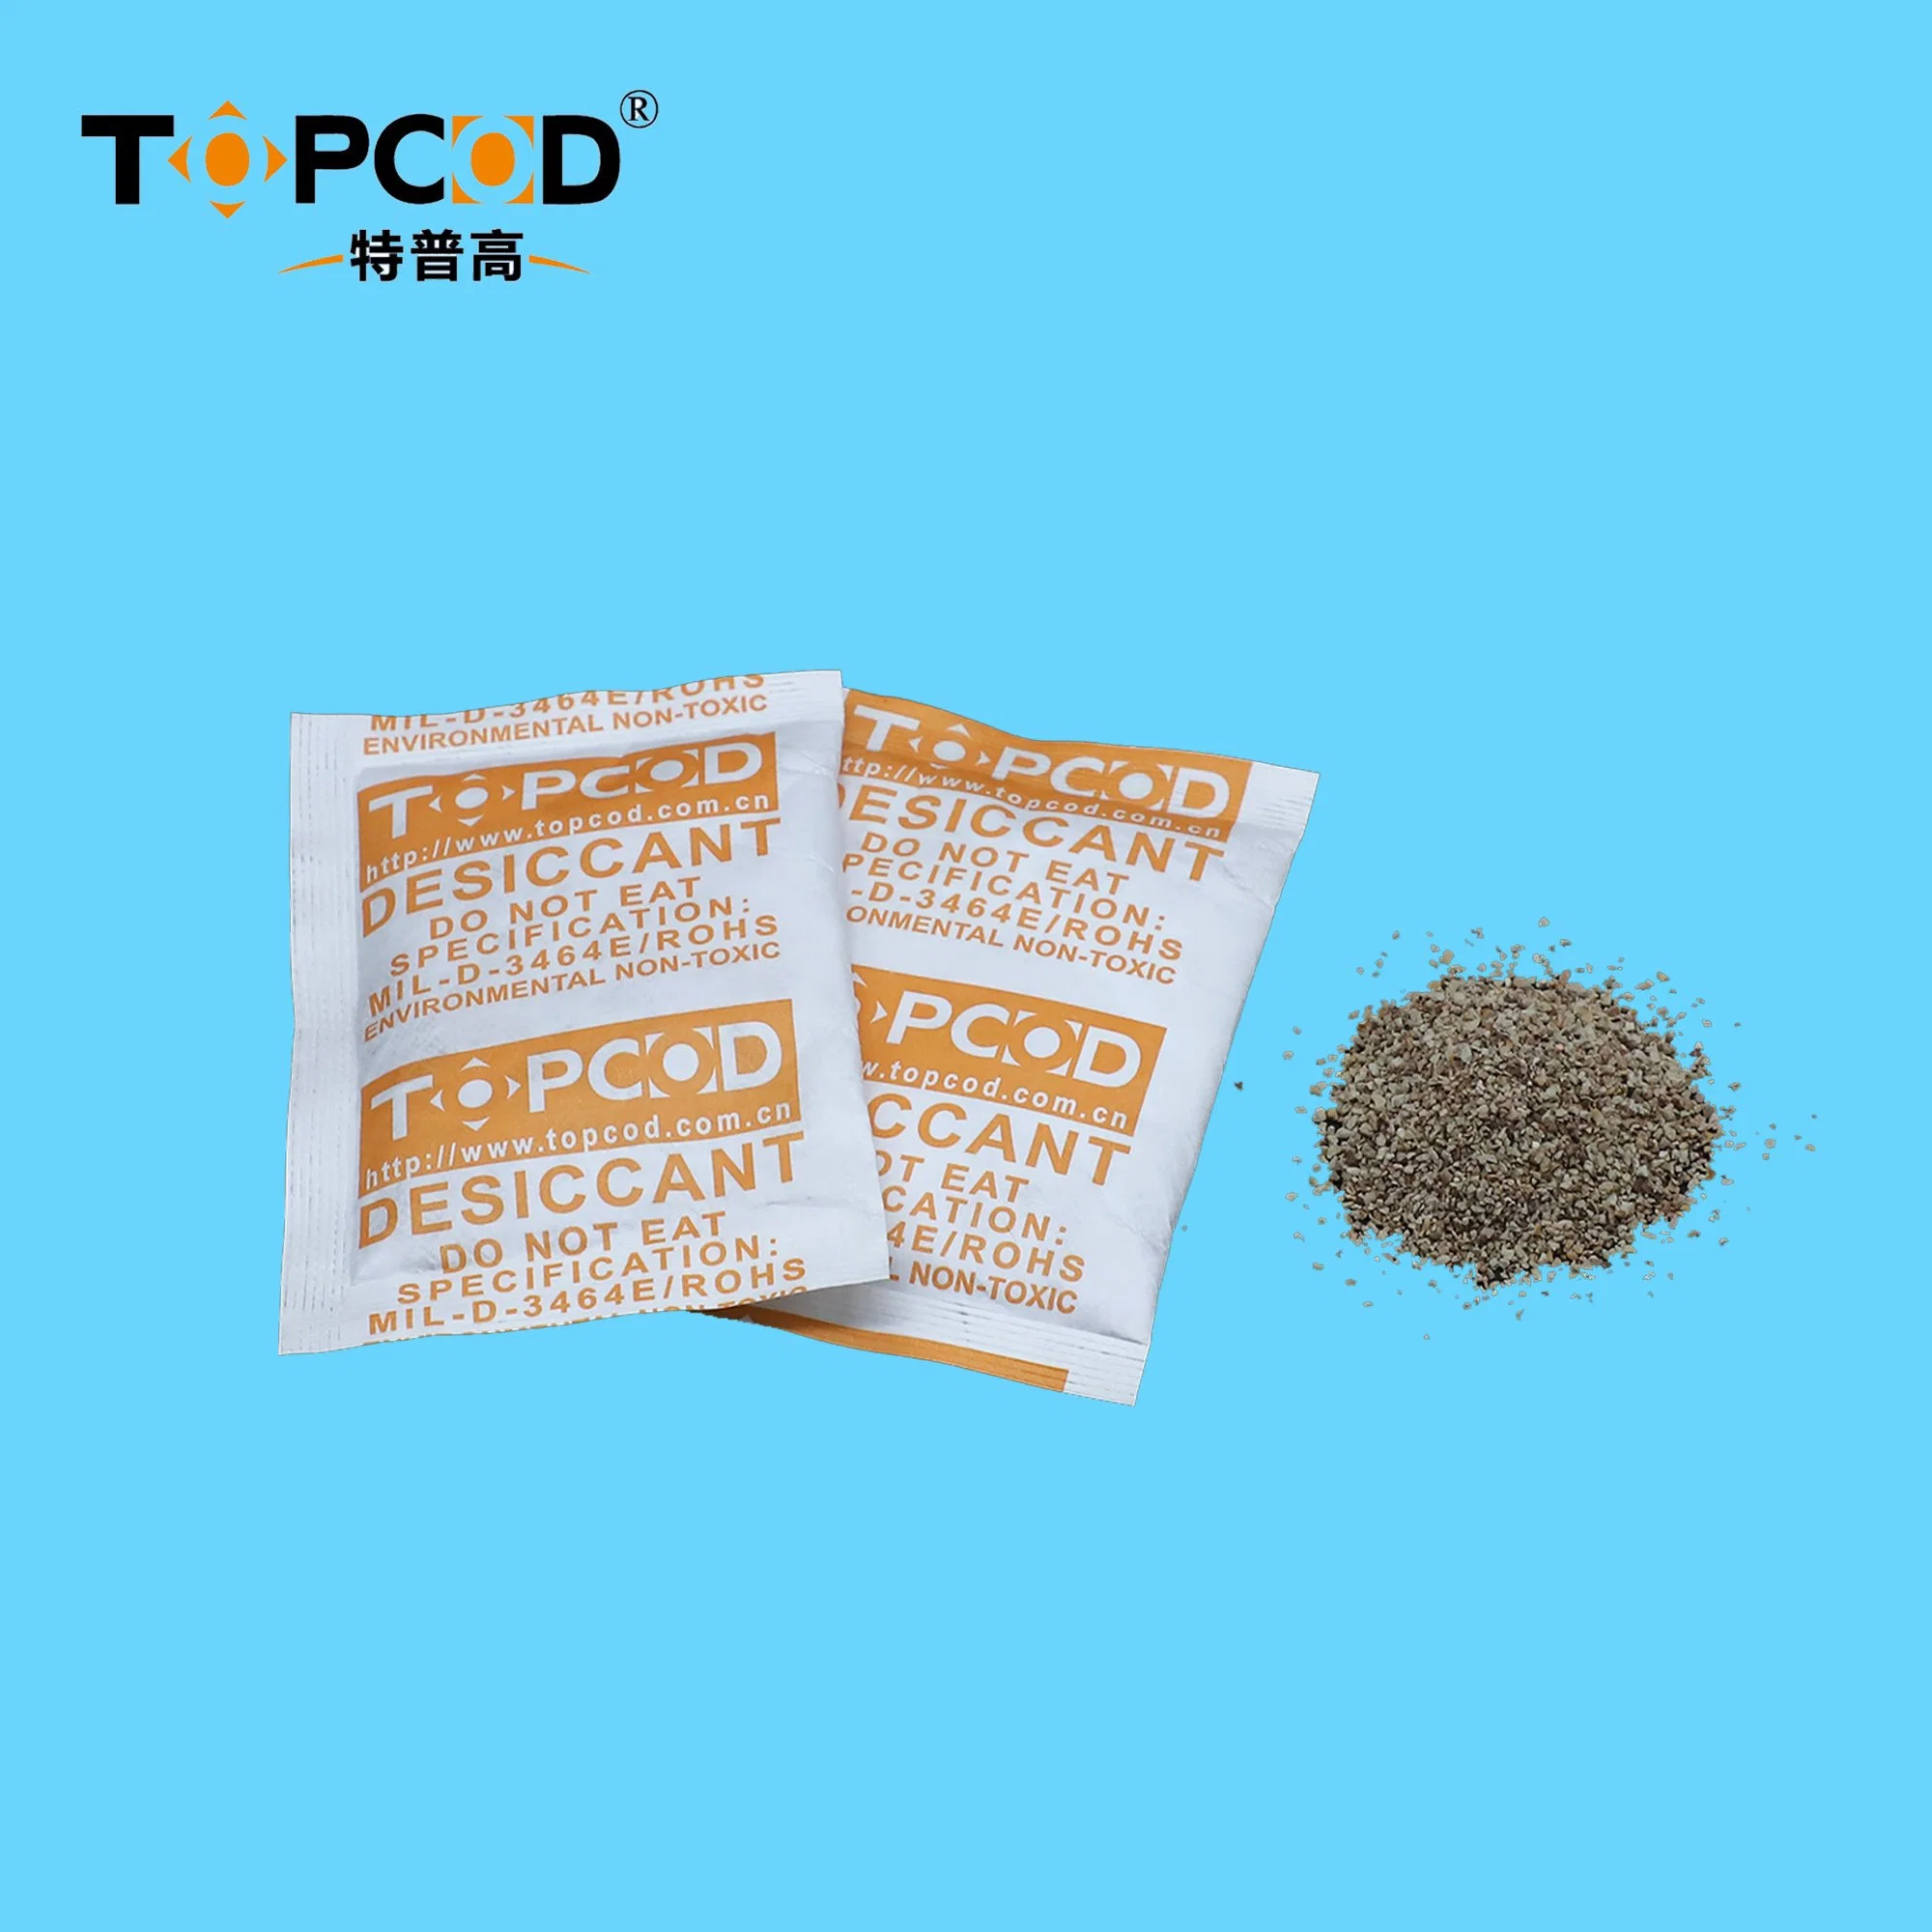 Bentonite/Montmorillonite Clay Desiccant for Container/ IC/ LED/ PCB/ Anti Static Devices